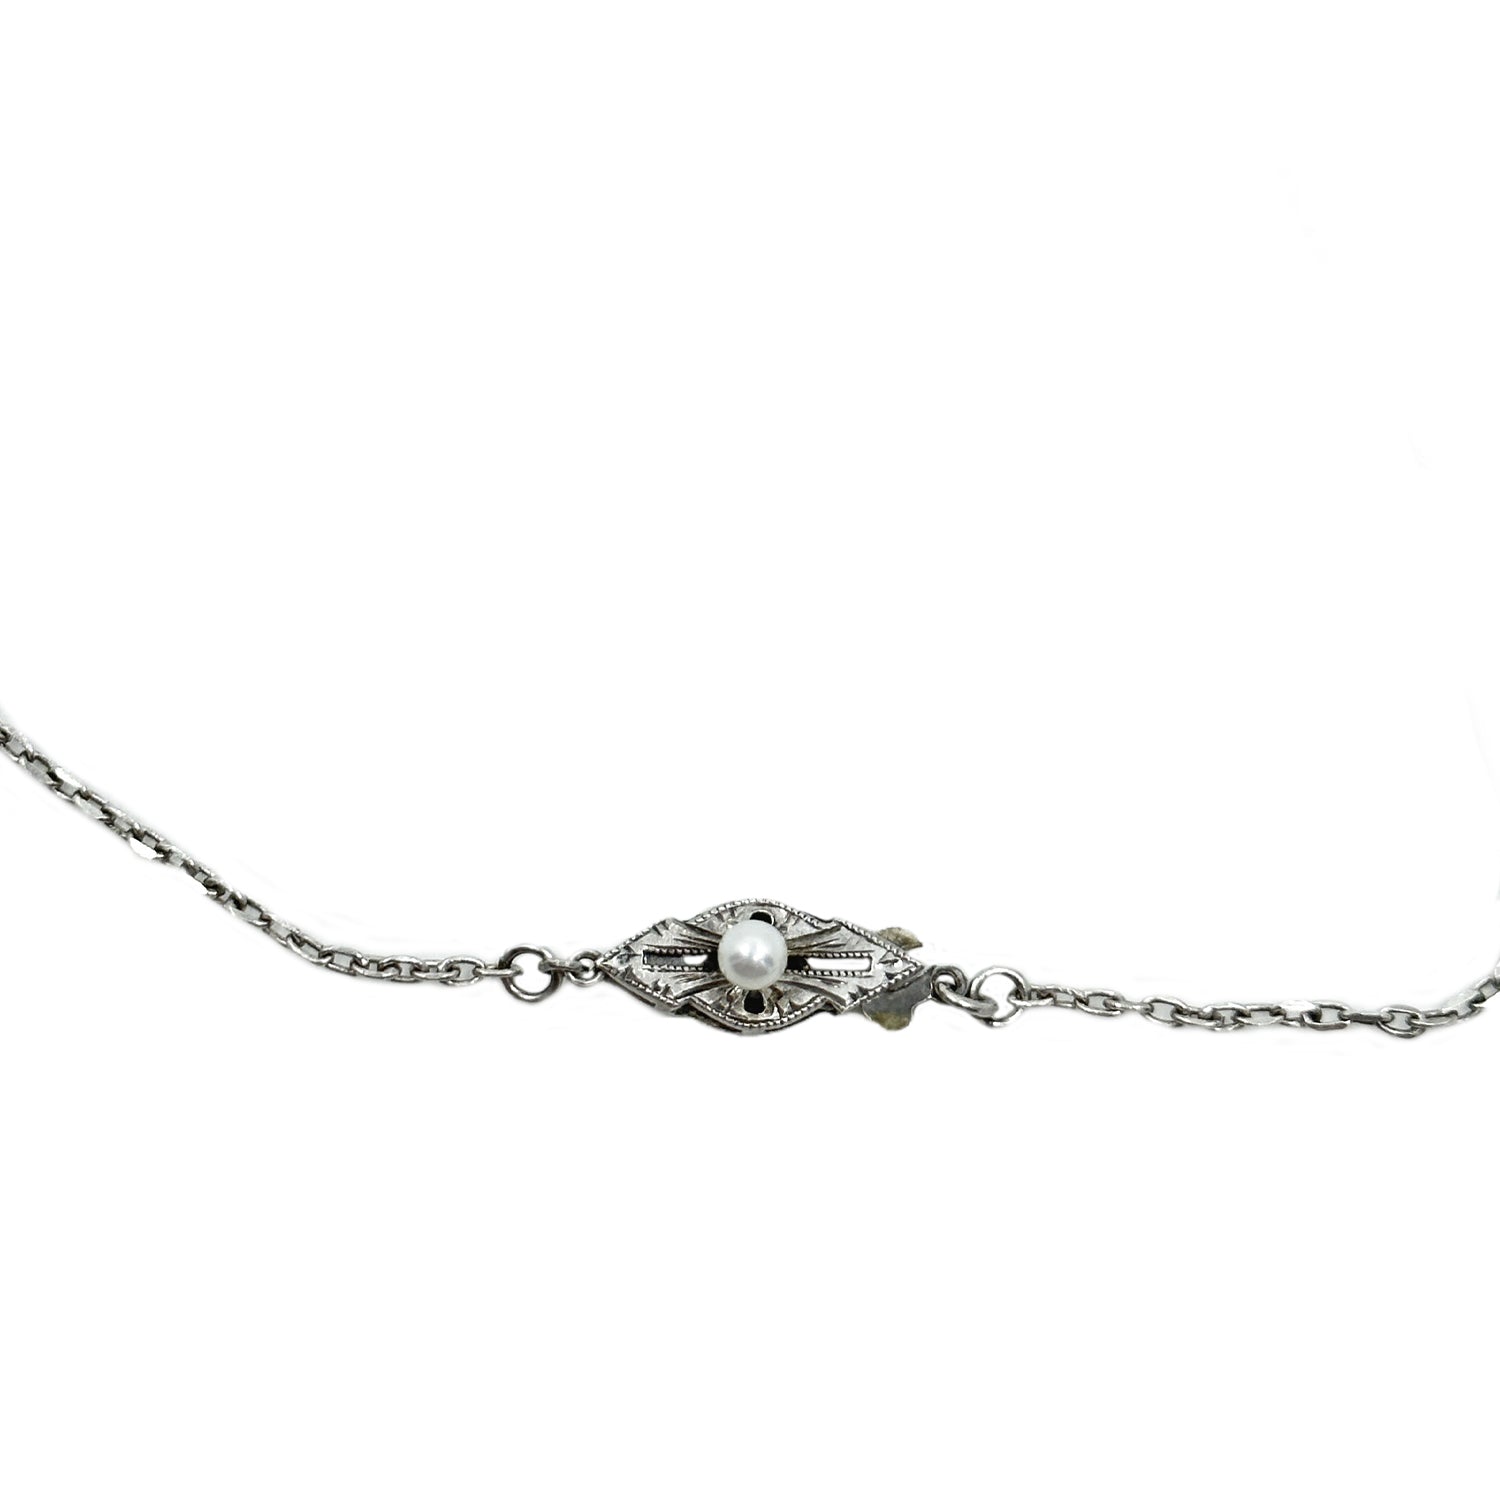 Art Nouveau Engraved Japanese Cultured Akoya Pearl Modernist Pendant Necklace- Sterling Silver 15.50 Inch